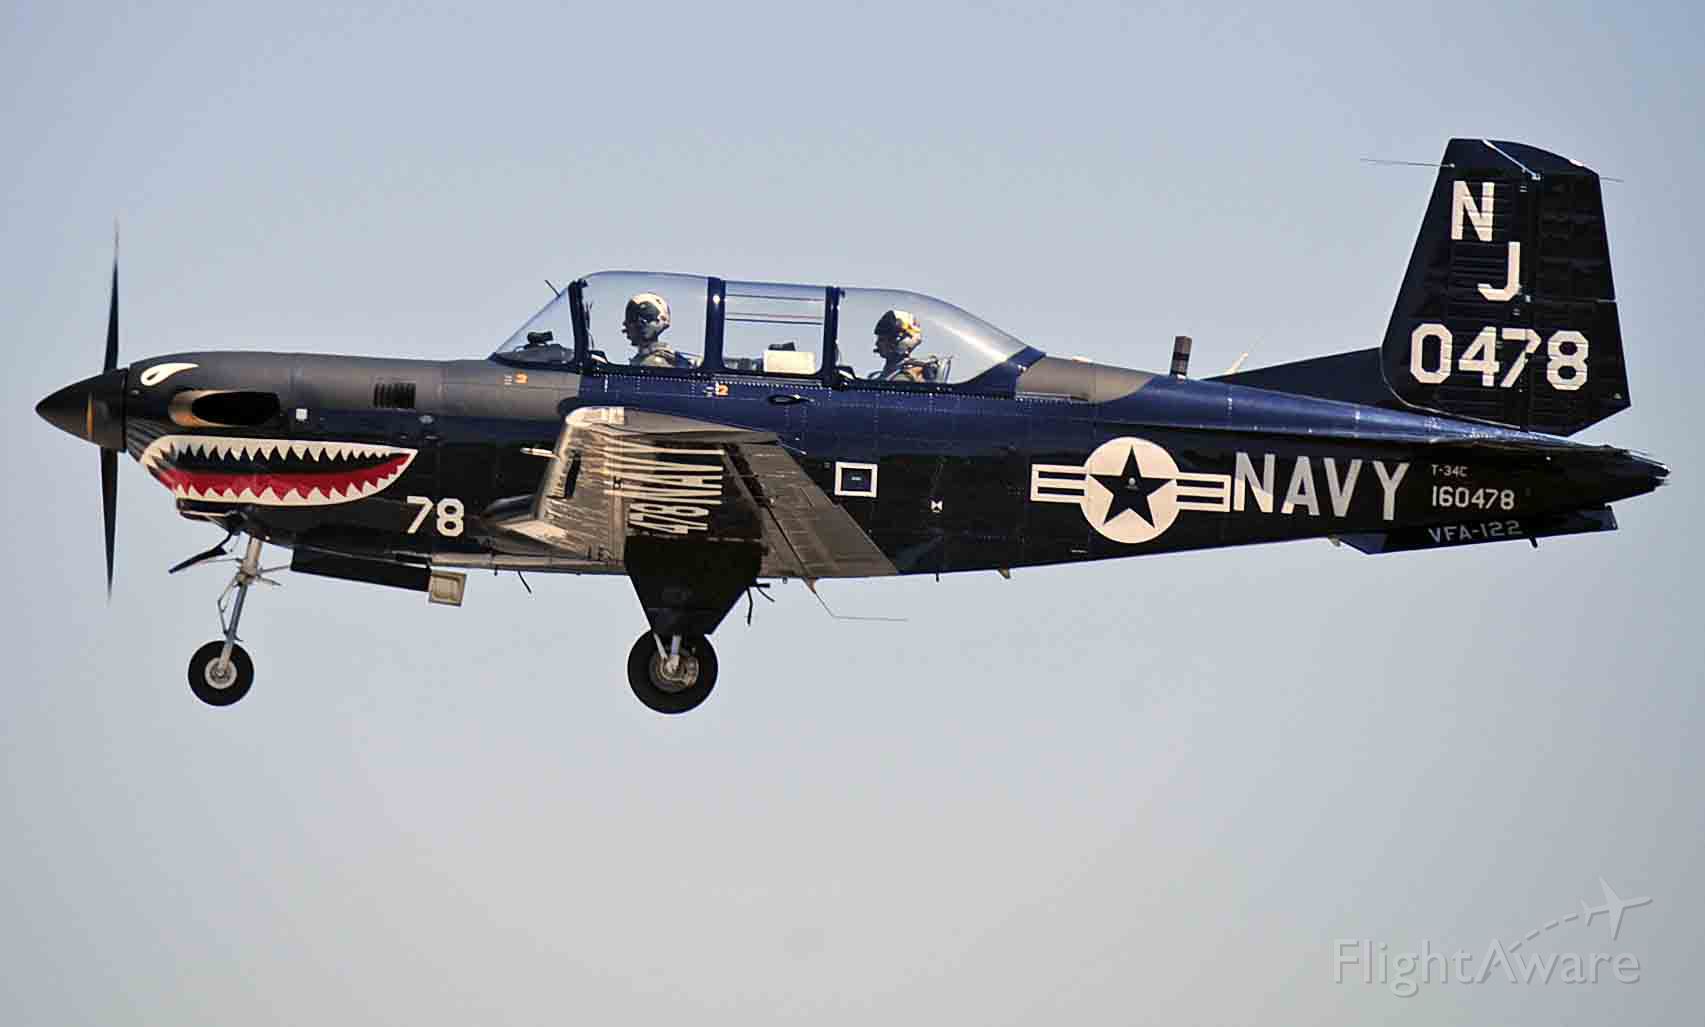 — — - VMA-122 T-34C touch-and-goes at Merced Regional Airport (KMCE)